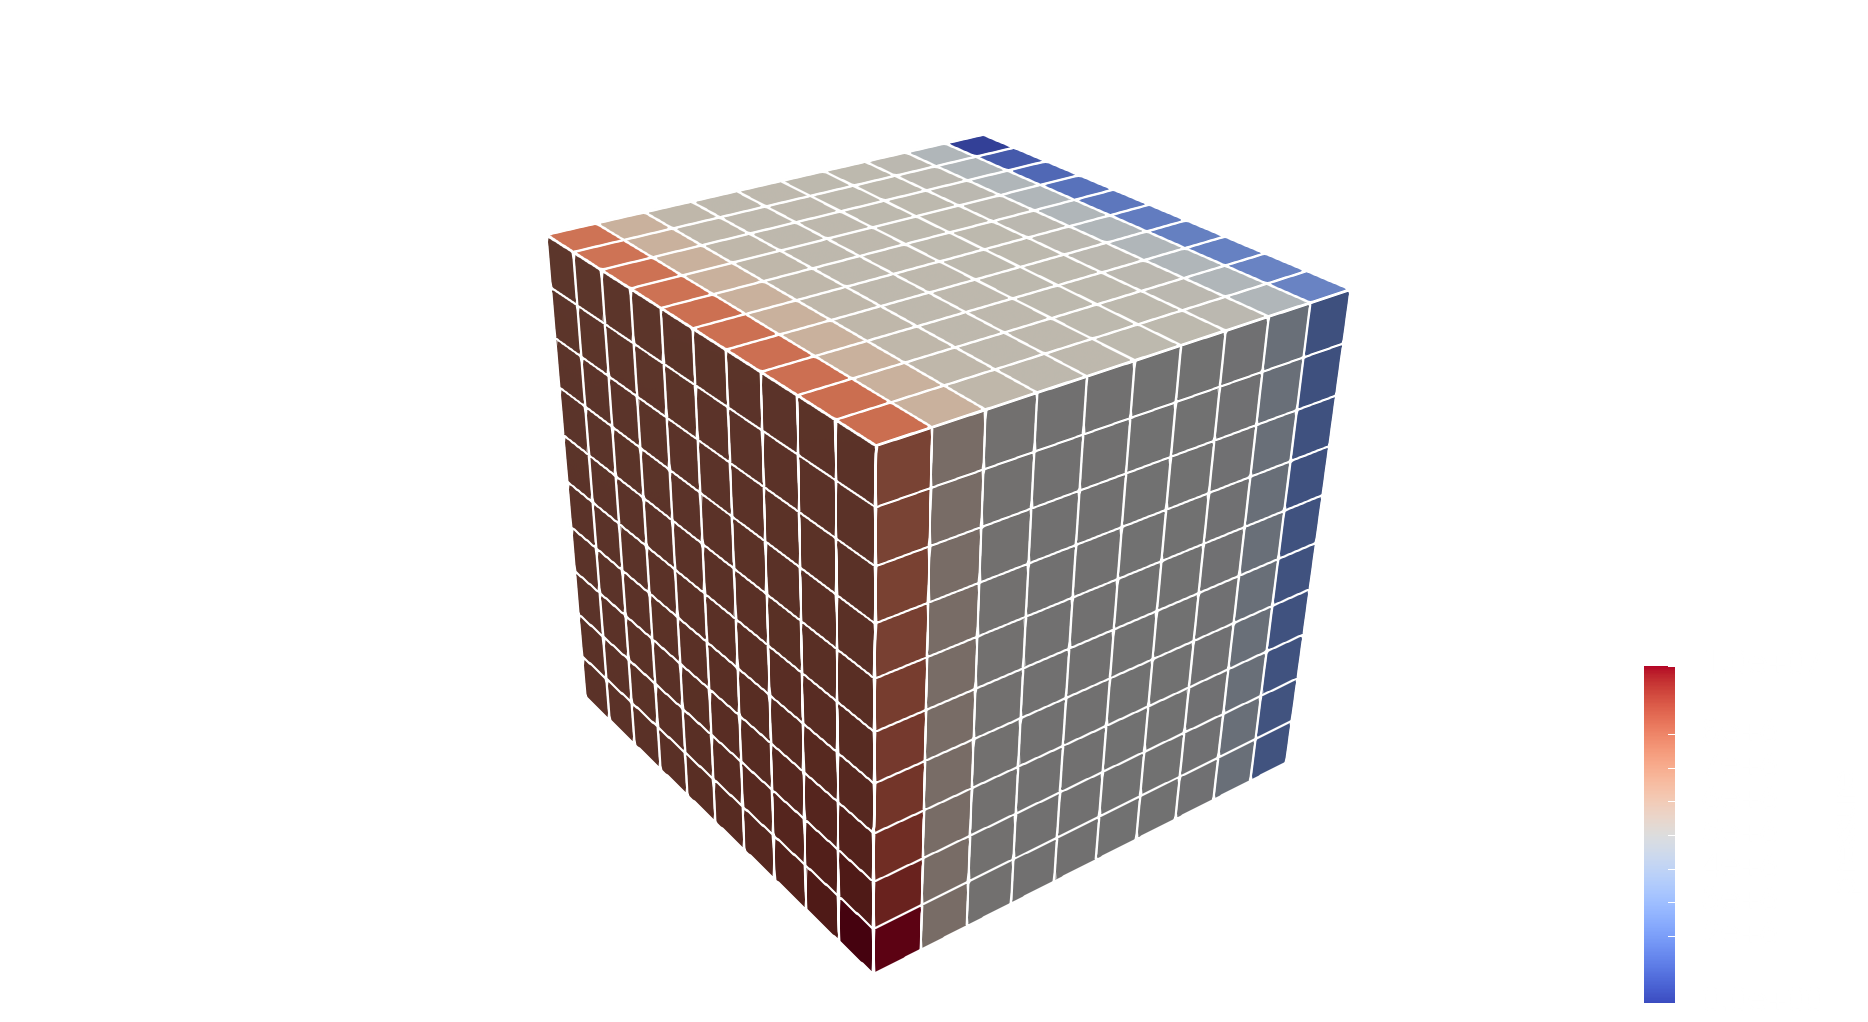 ../../../../_images/cube_initial.png